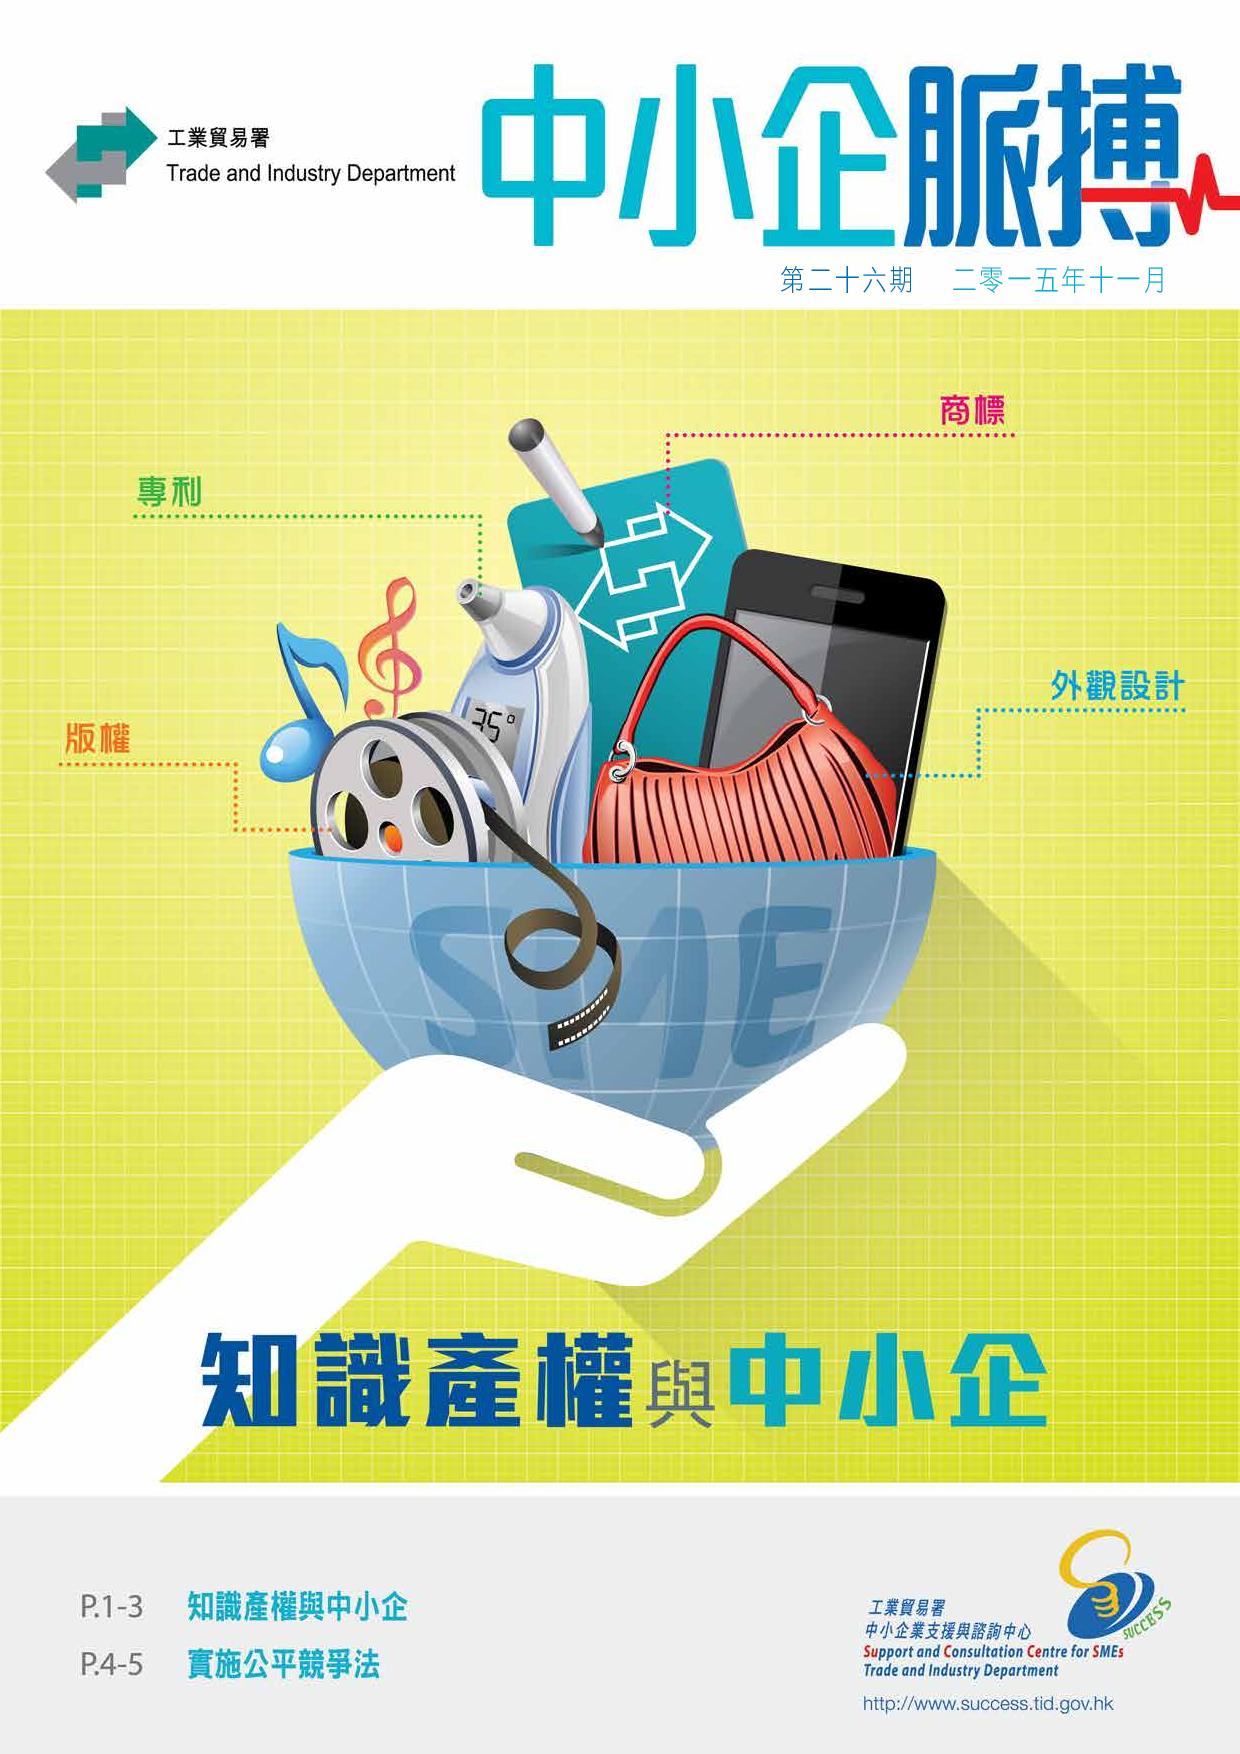 Twenty-Sixth Issue (November 2015) (Only available in Chinese)